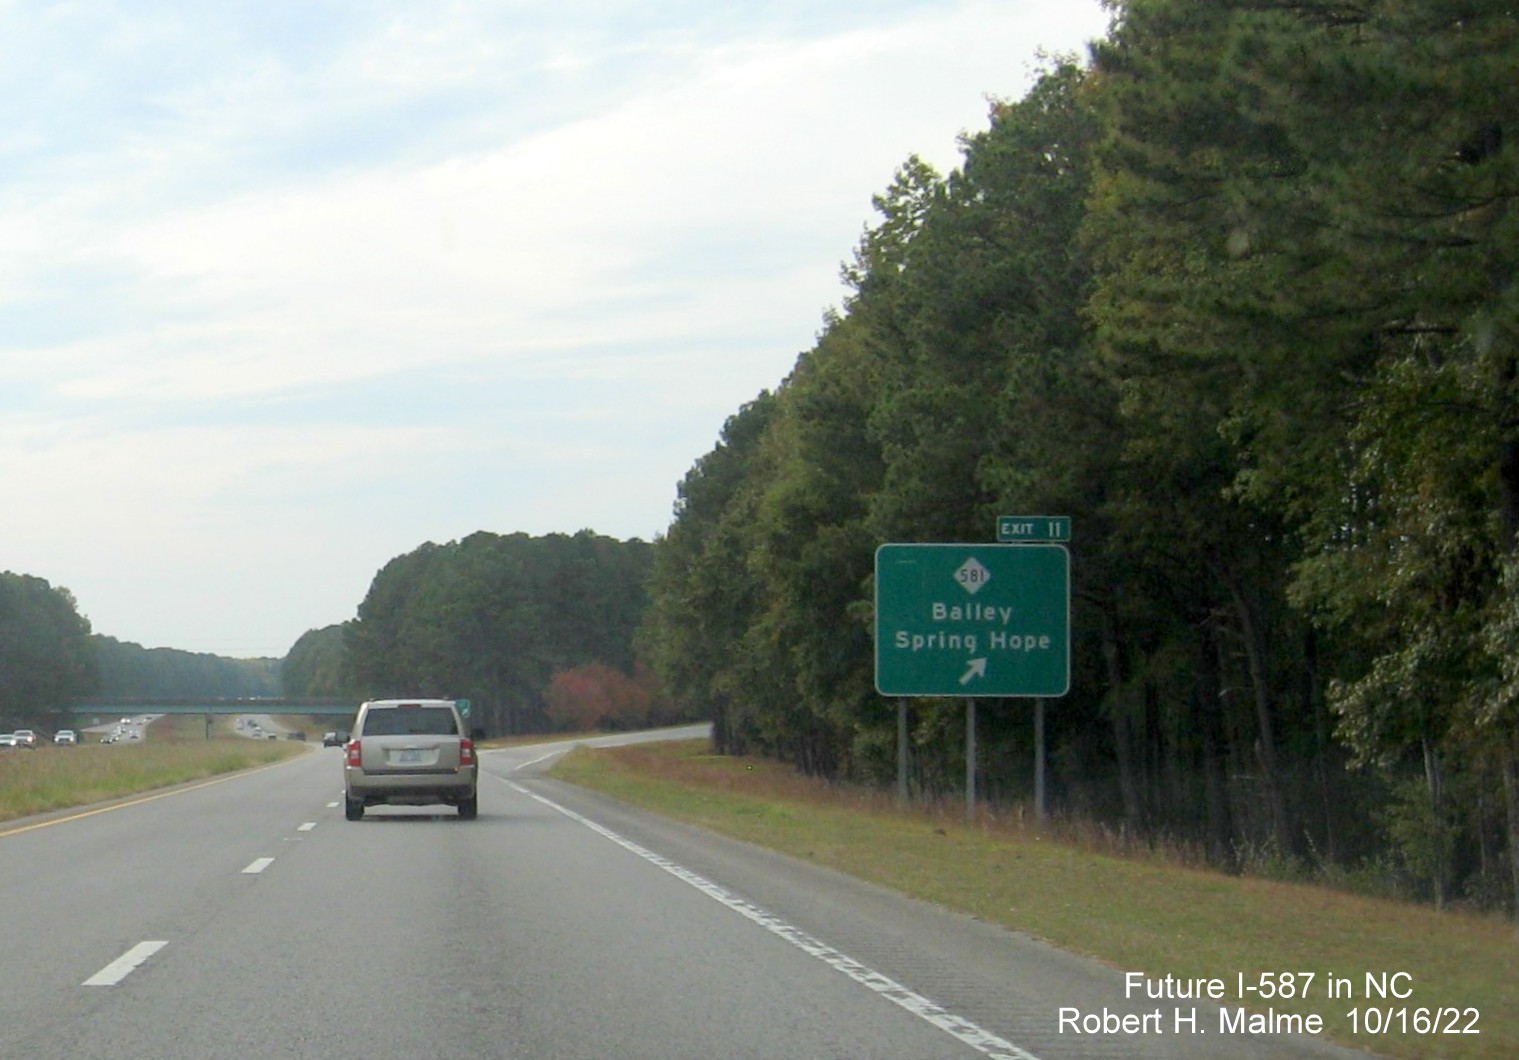 Image of ground mounted ramp sign for NC 581 exit on US 264 West with new Future I-587 mileage exit number, October 2022